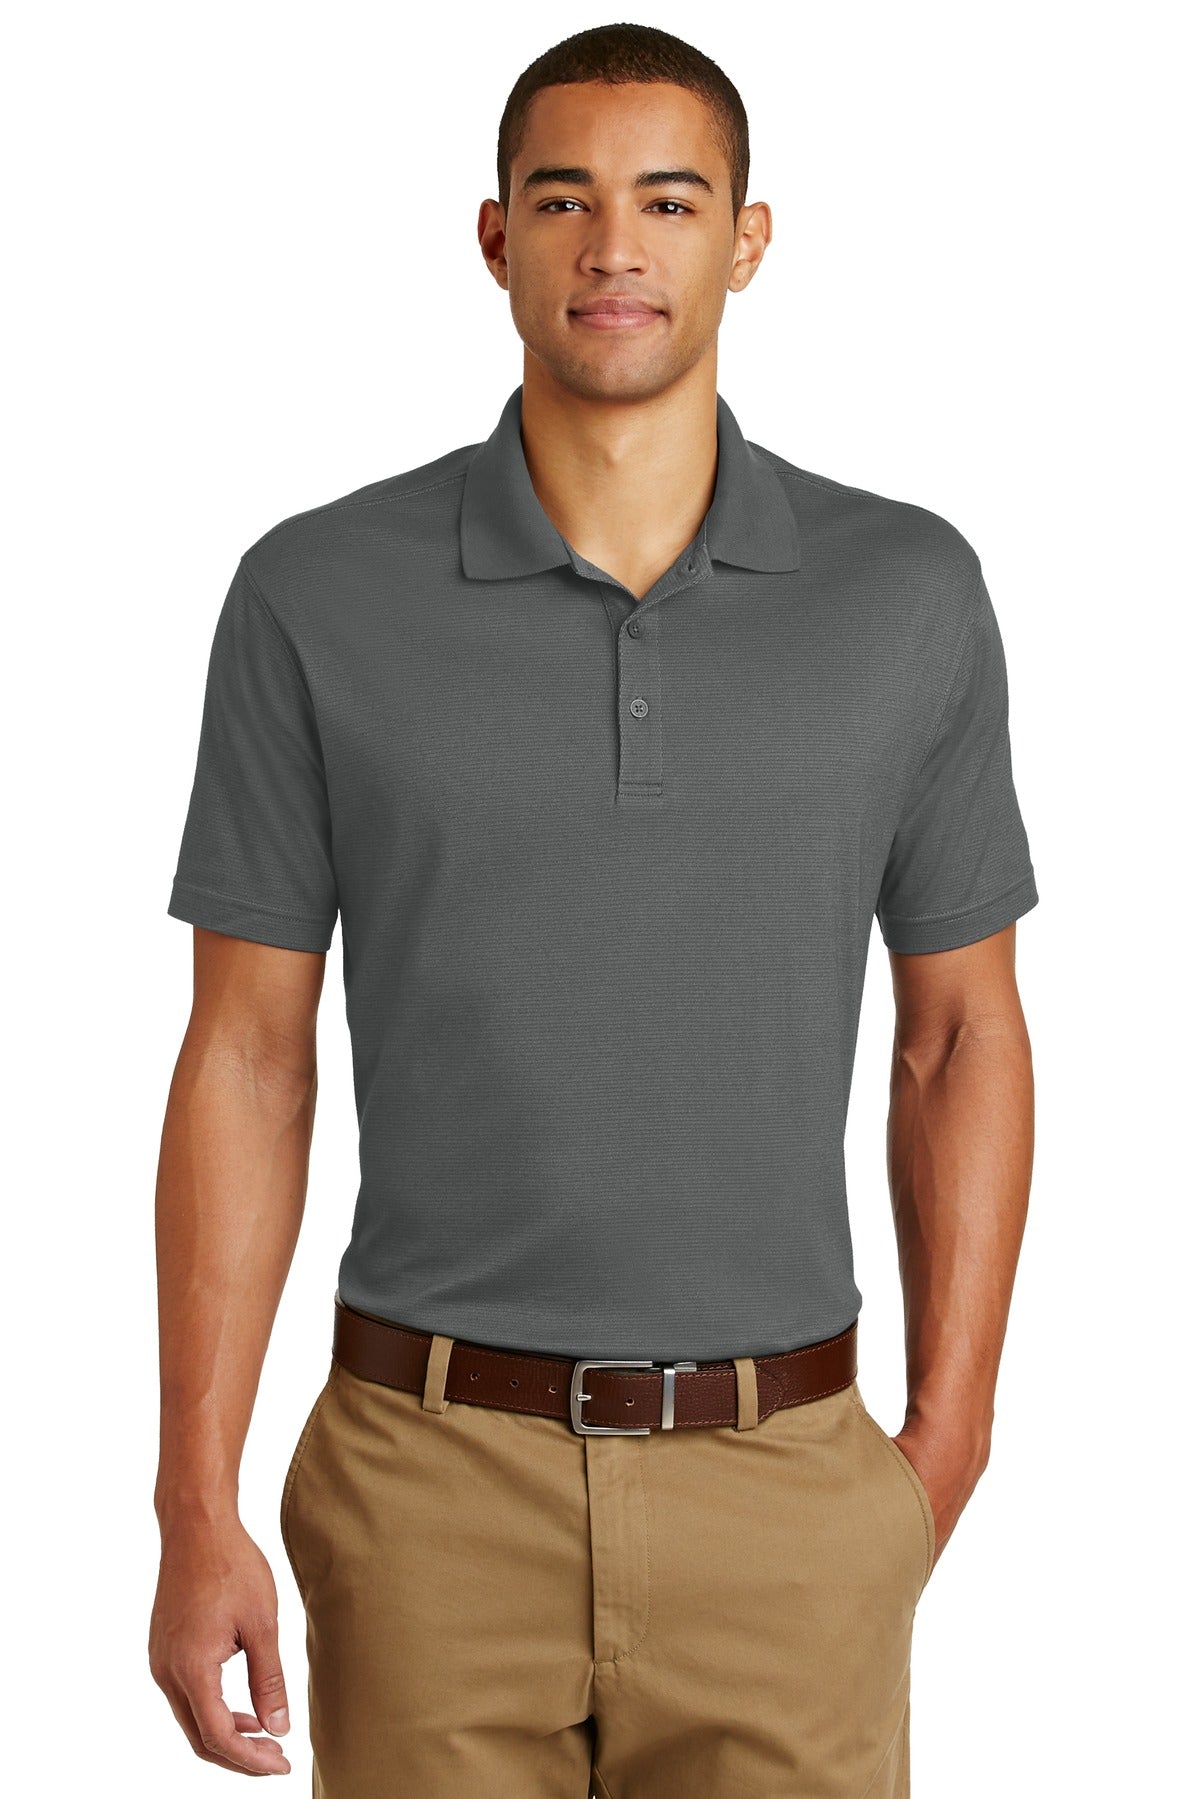 Photo of Eddie Bauer Polos/Knits EB102  color  Grey Steel